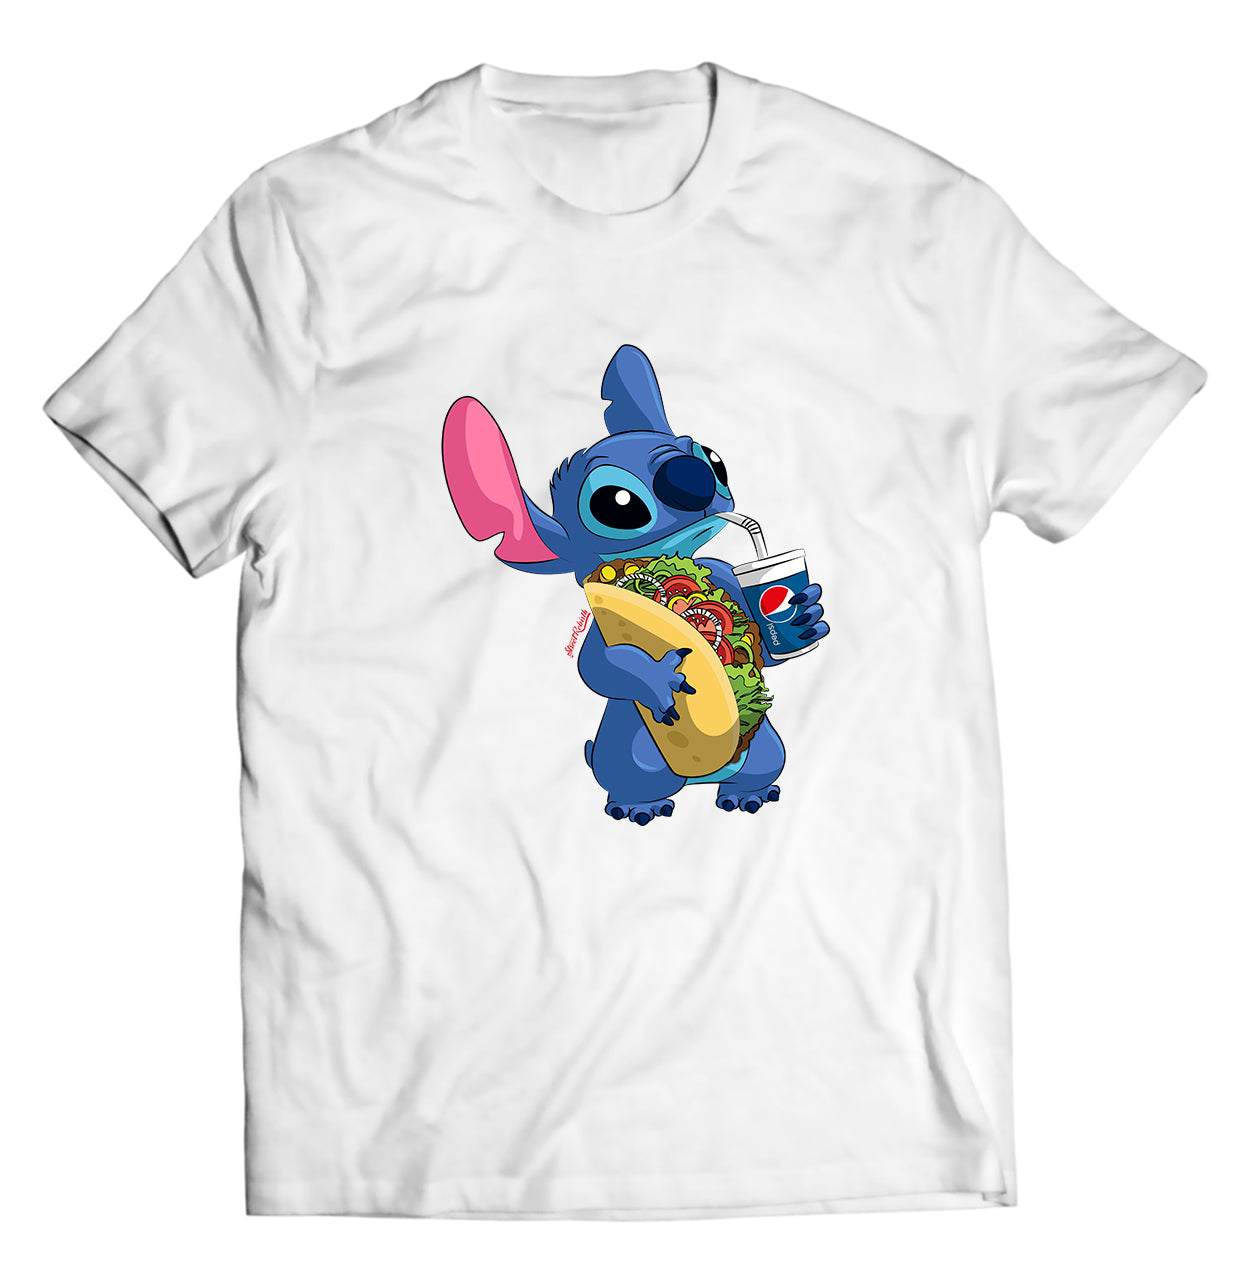 Blue Alien Taco Shirt - Direct To Garment Quality Print - Unisex Shirt - Gift For Him or Her